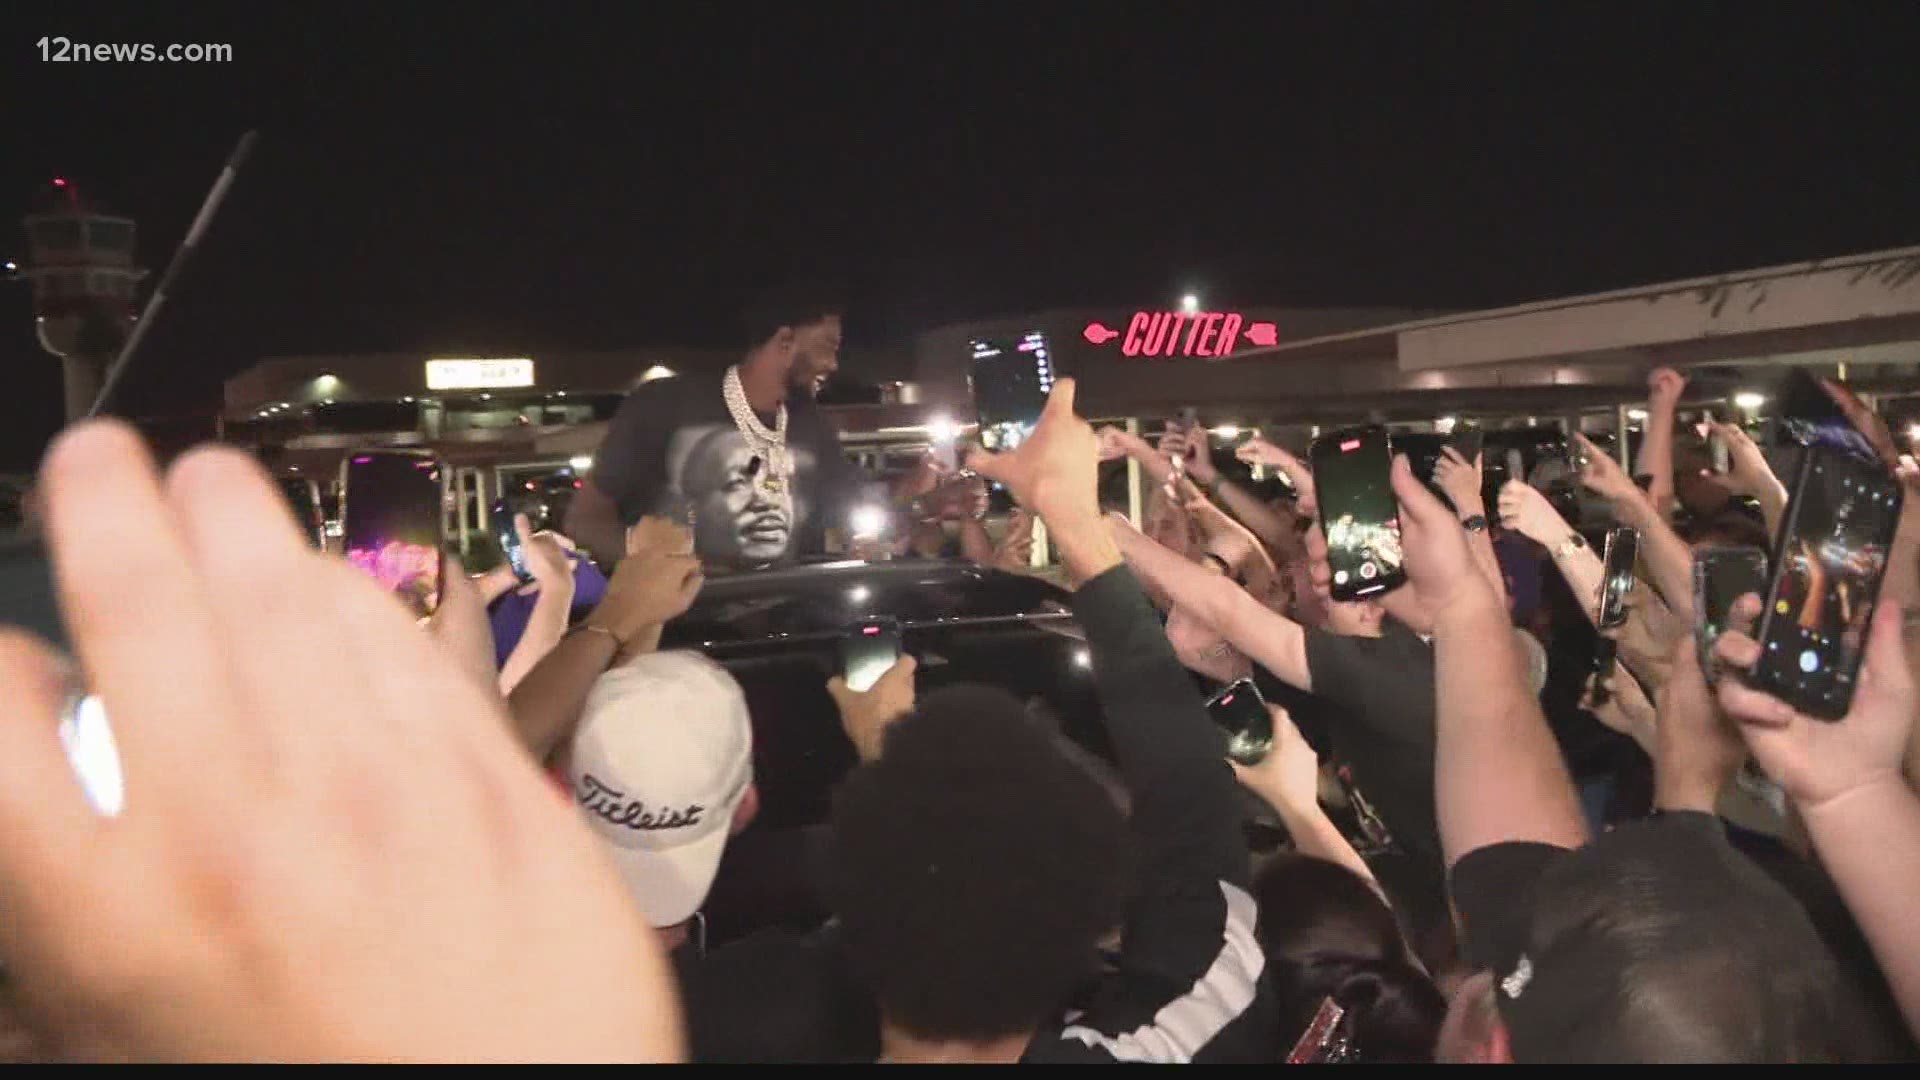 Phoenix Suns fans made their way to the airport Sunday night to welcome home the team after they swept the Denver Nuggets.